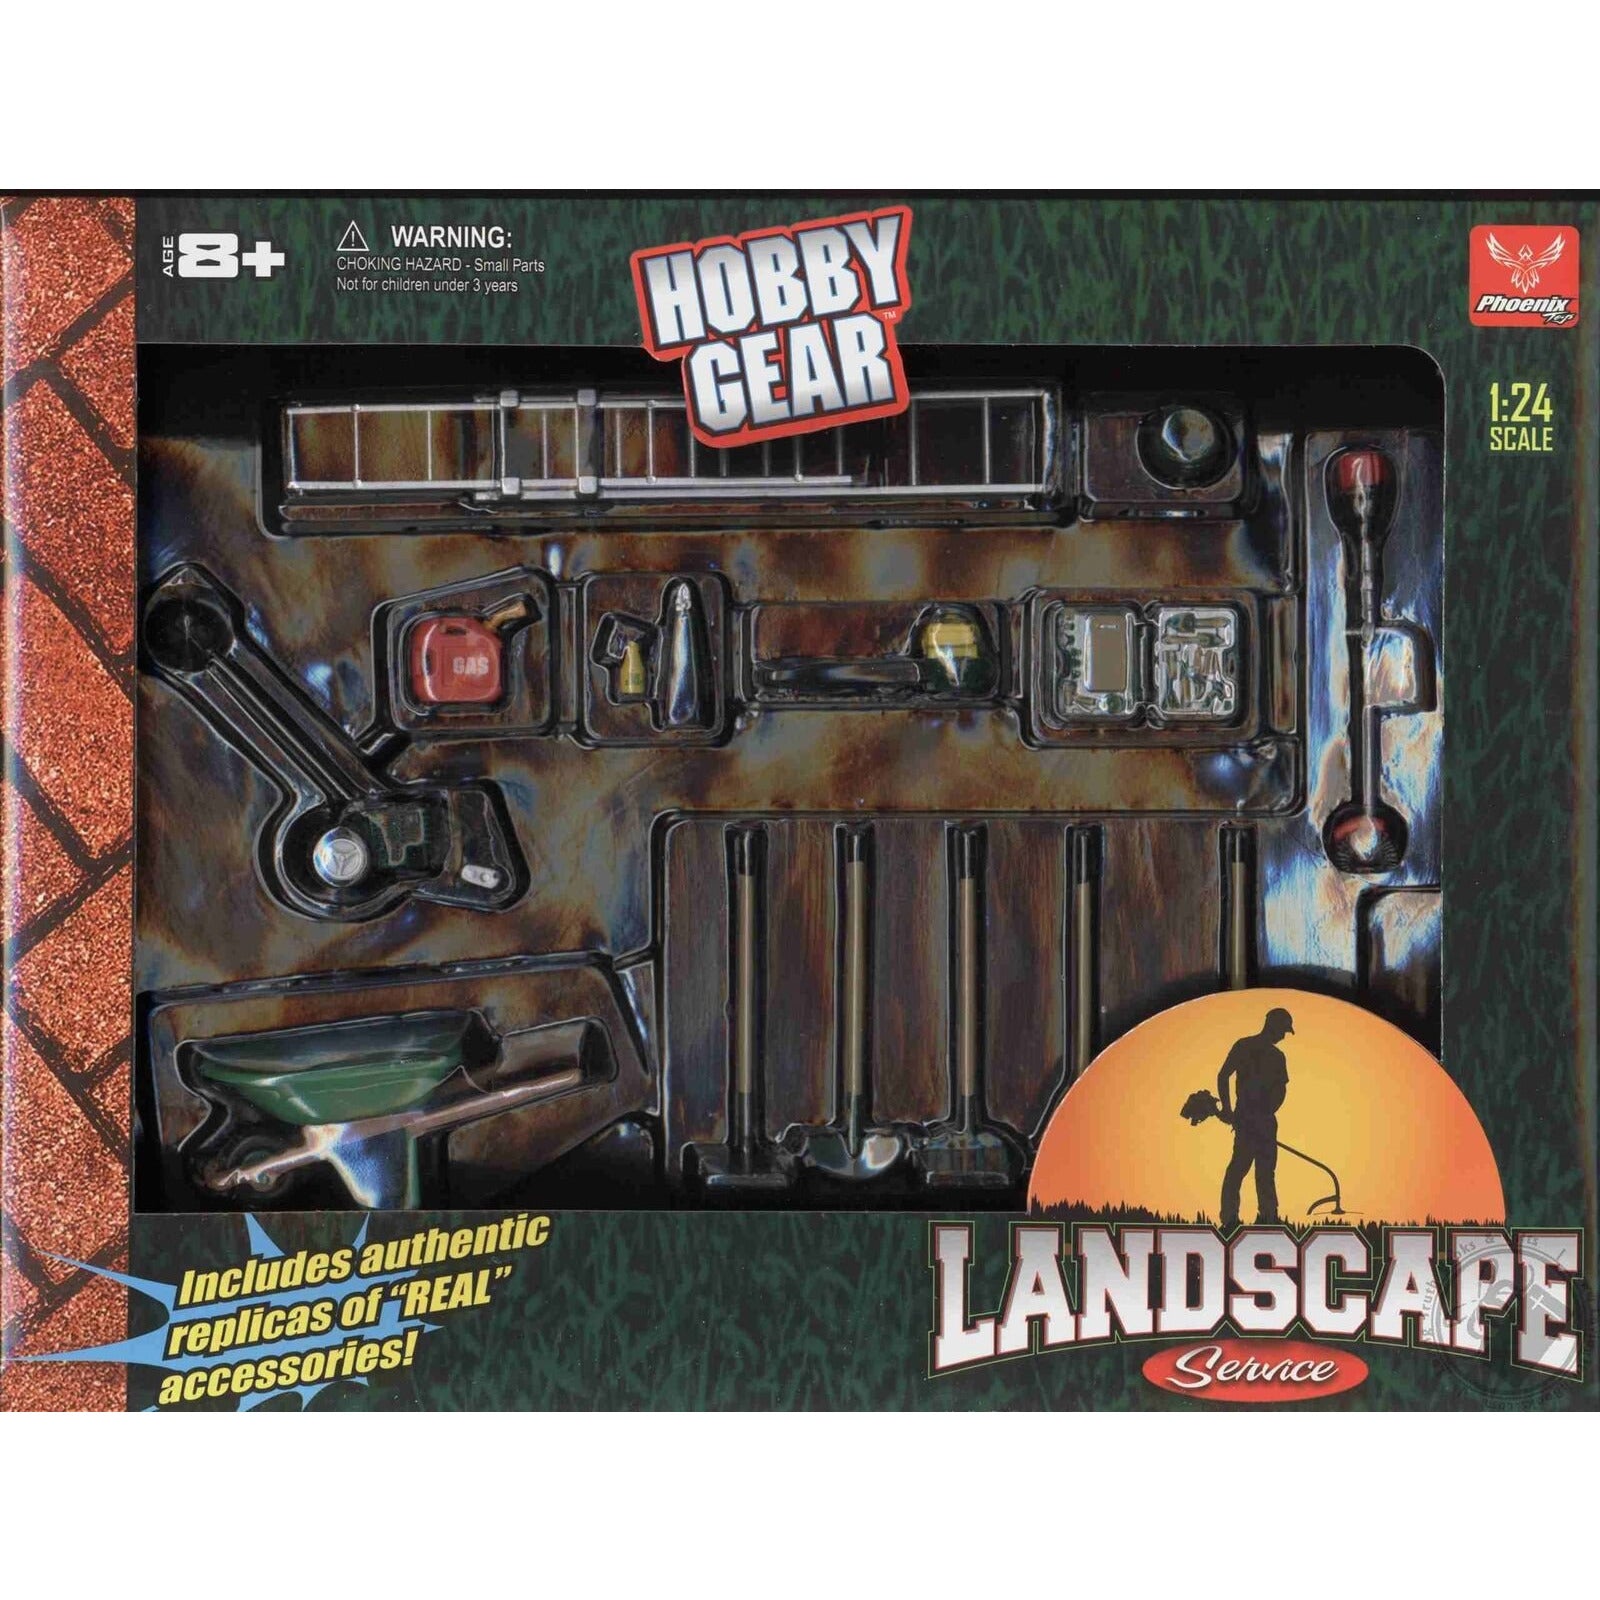 Landscaping Accessory Set 1/24 by Phoenix Toys